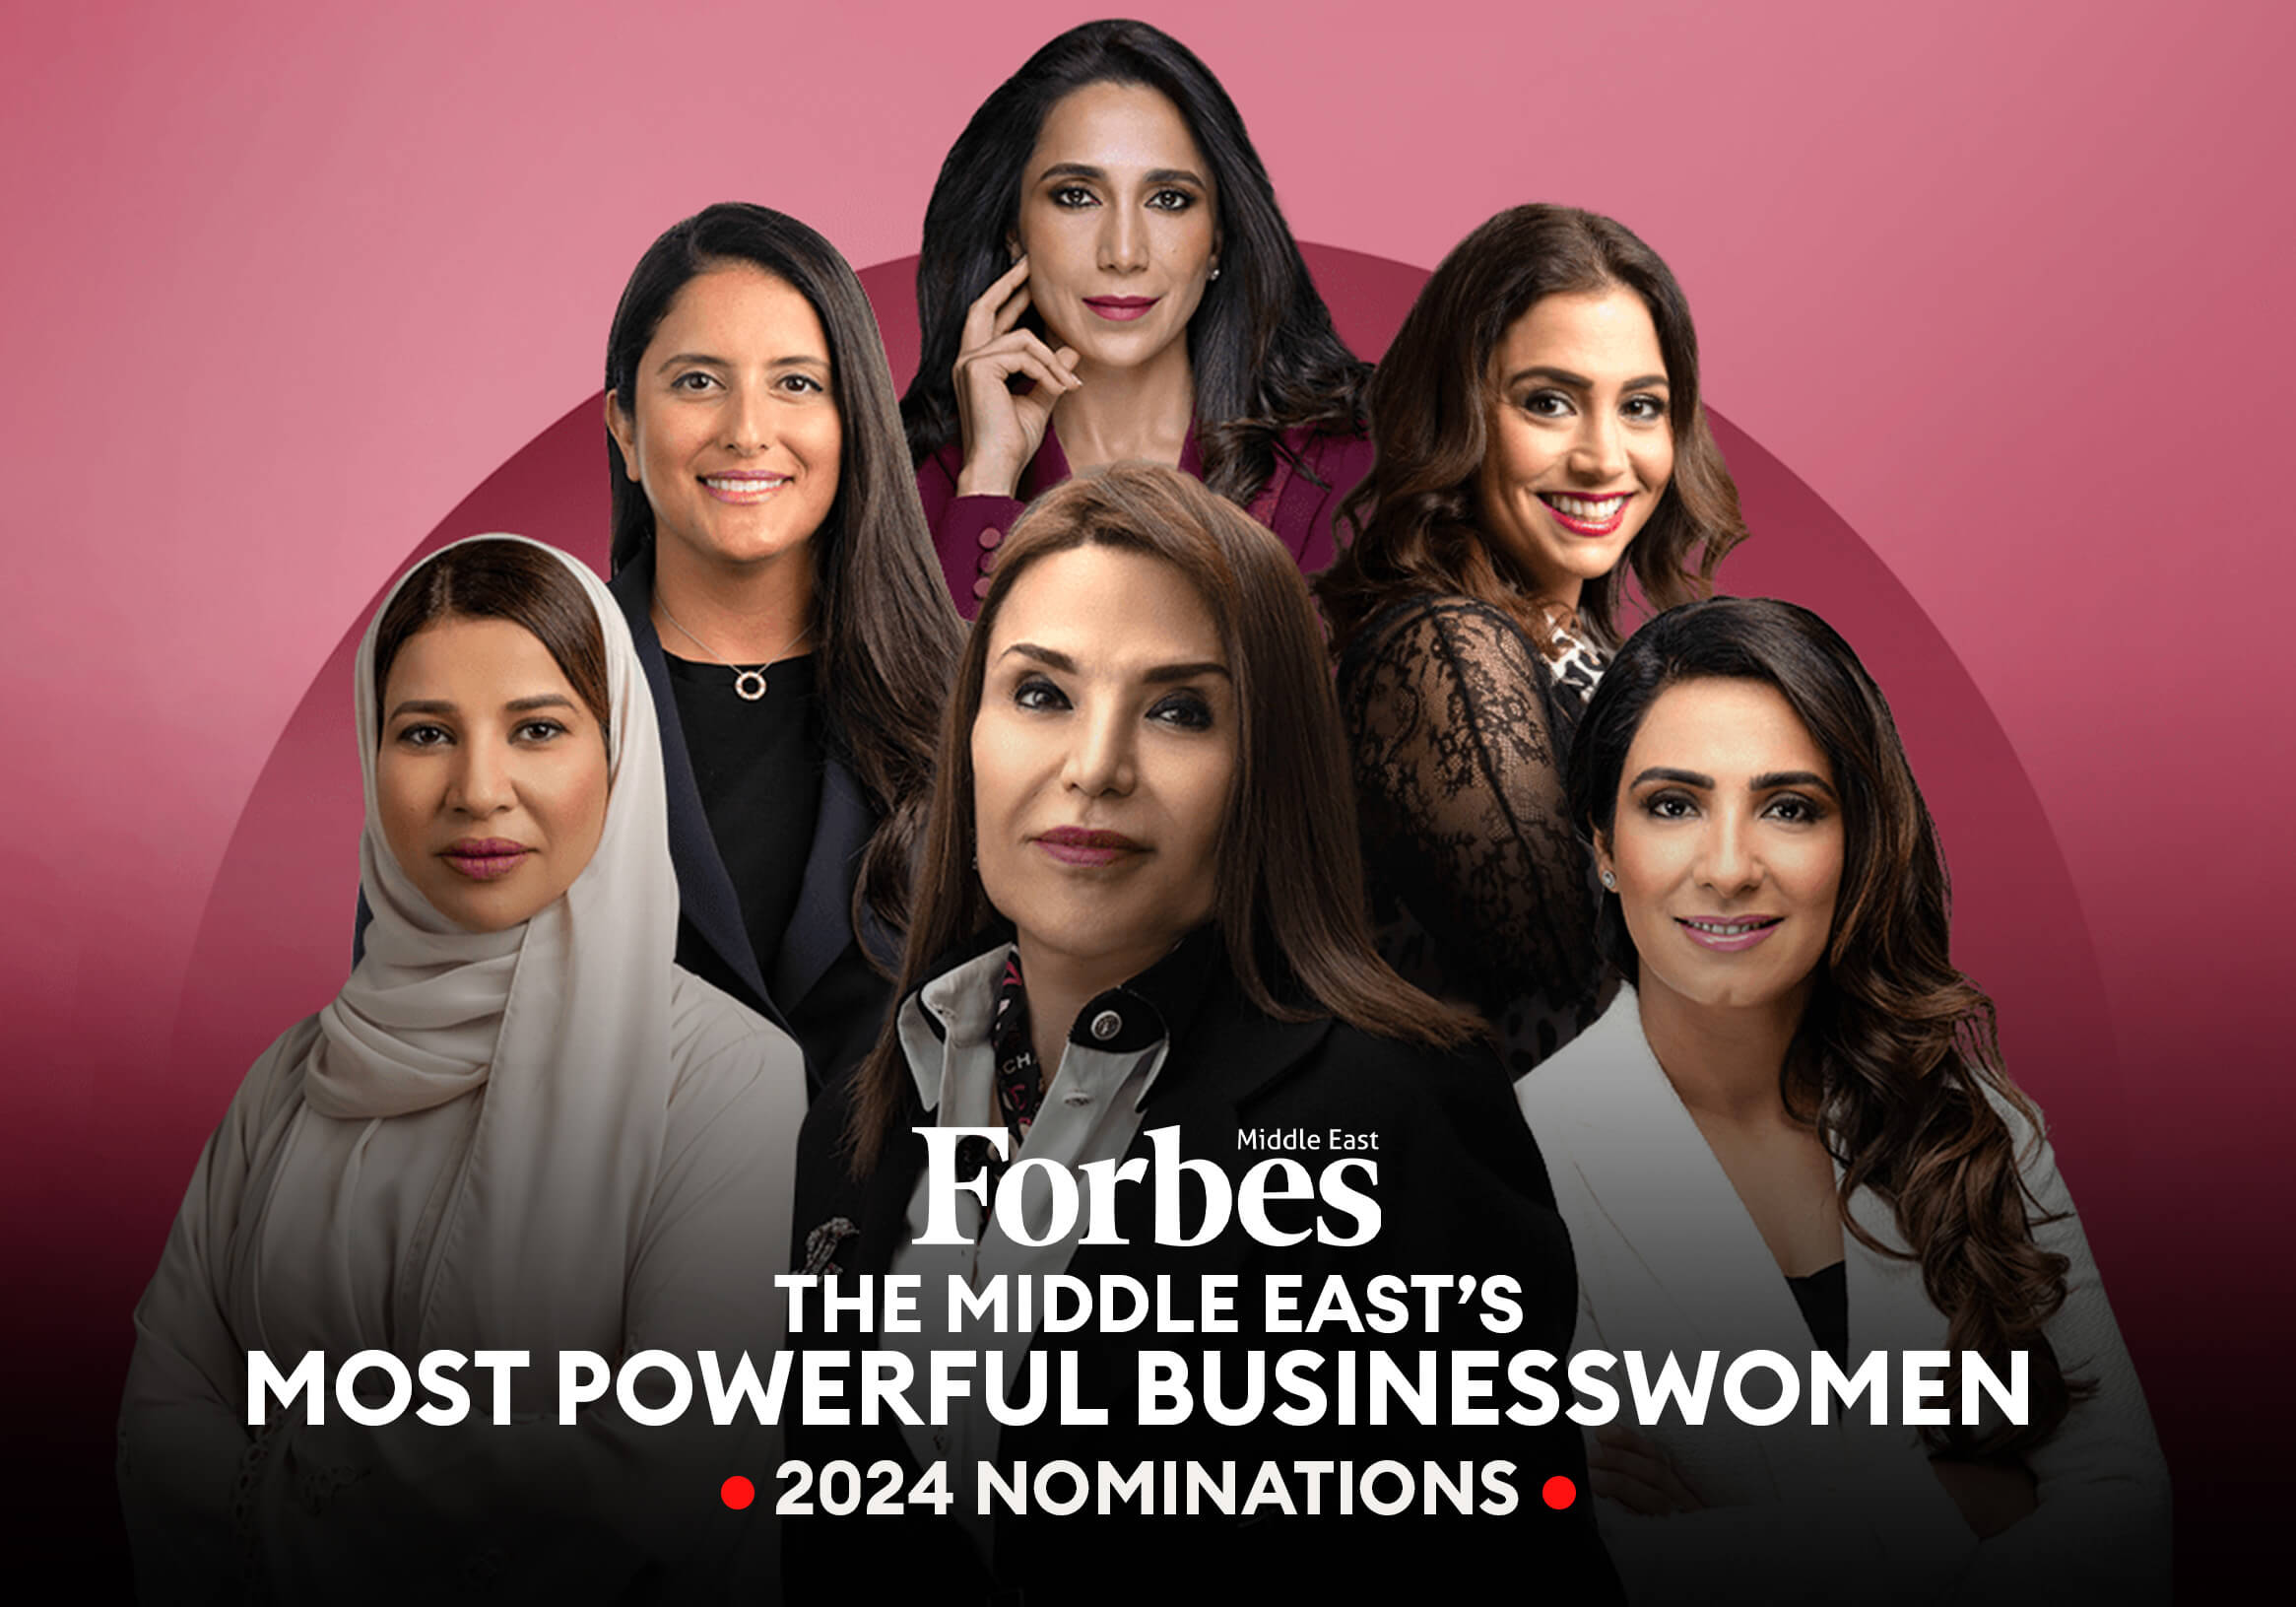 The Middle East’s Most Powerful Businesswomen 2024 Nominations